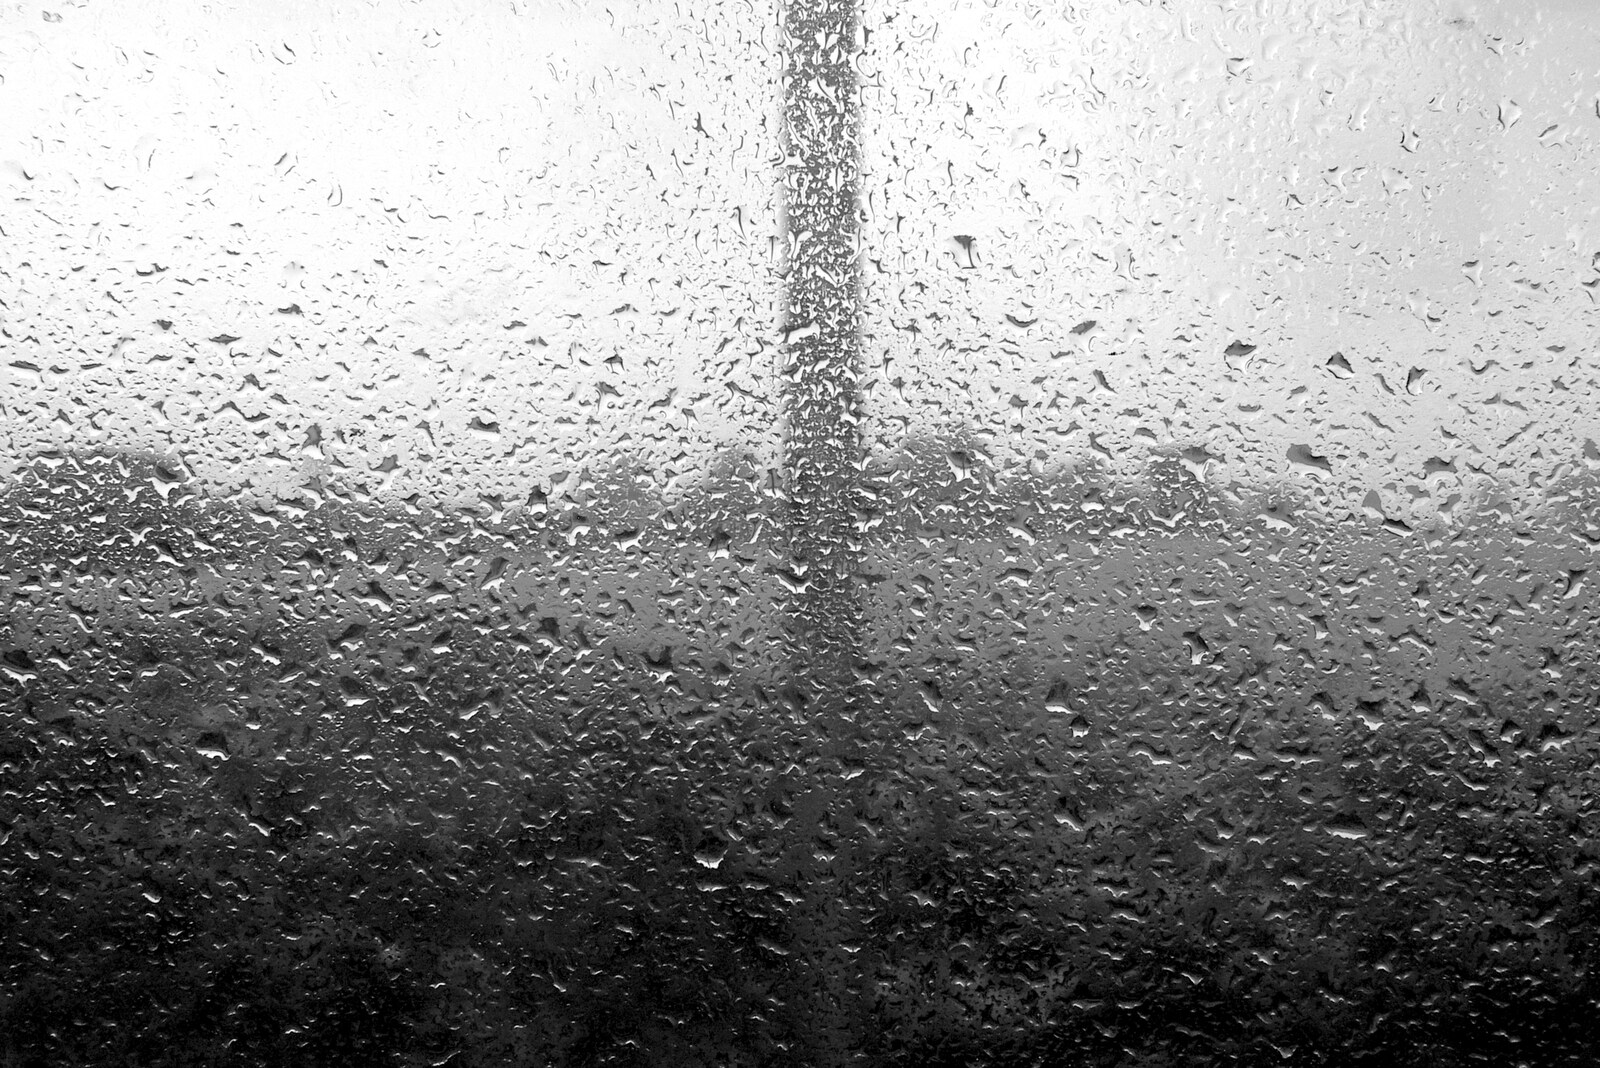 Rain on the train window from Borough Market and North Clapham Tapas, London - 23rd July 2005